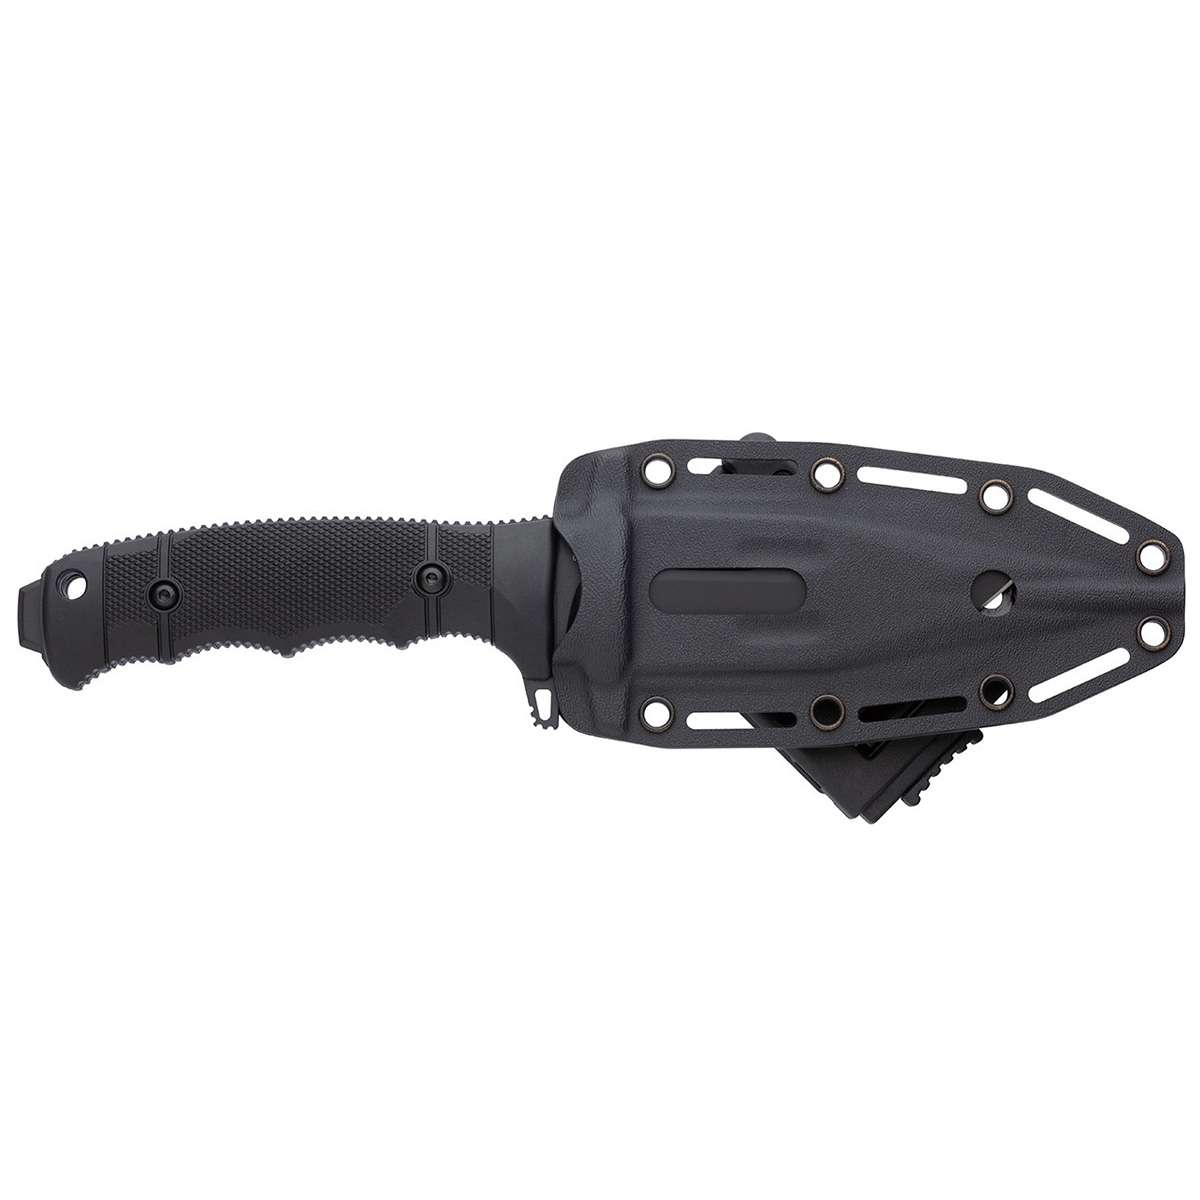 SOG Seal FX Partially Serrated Survival Knife